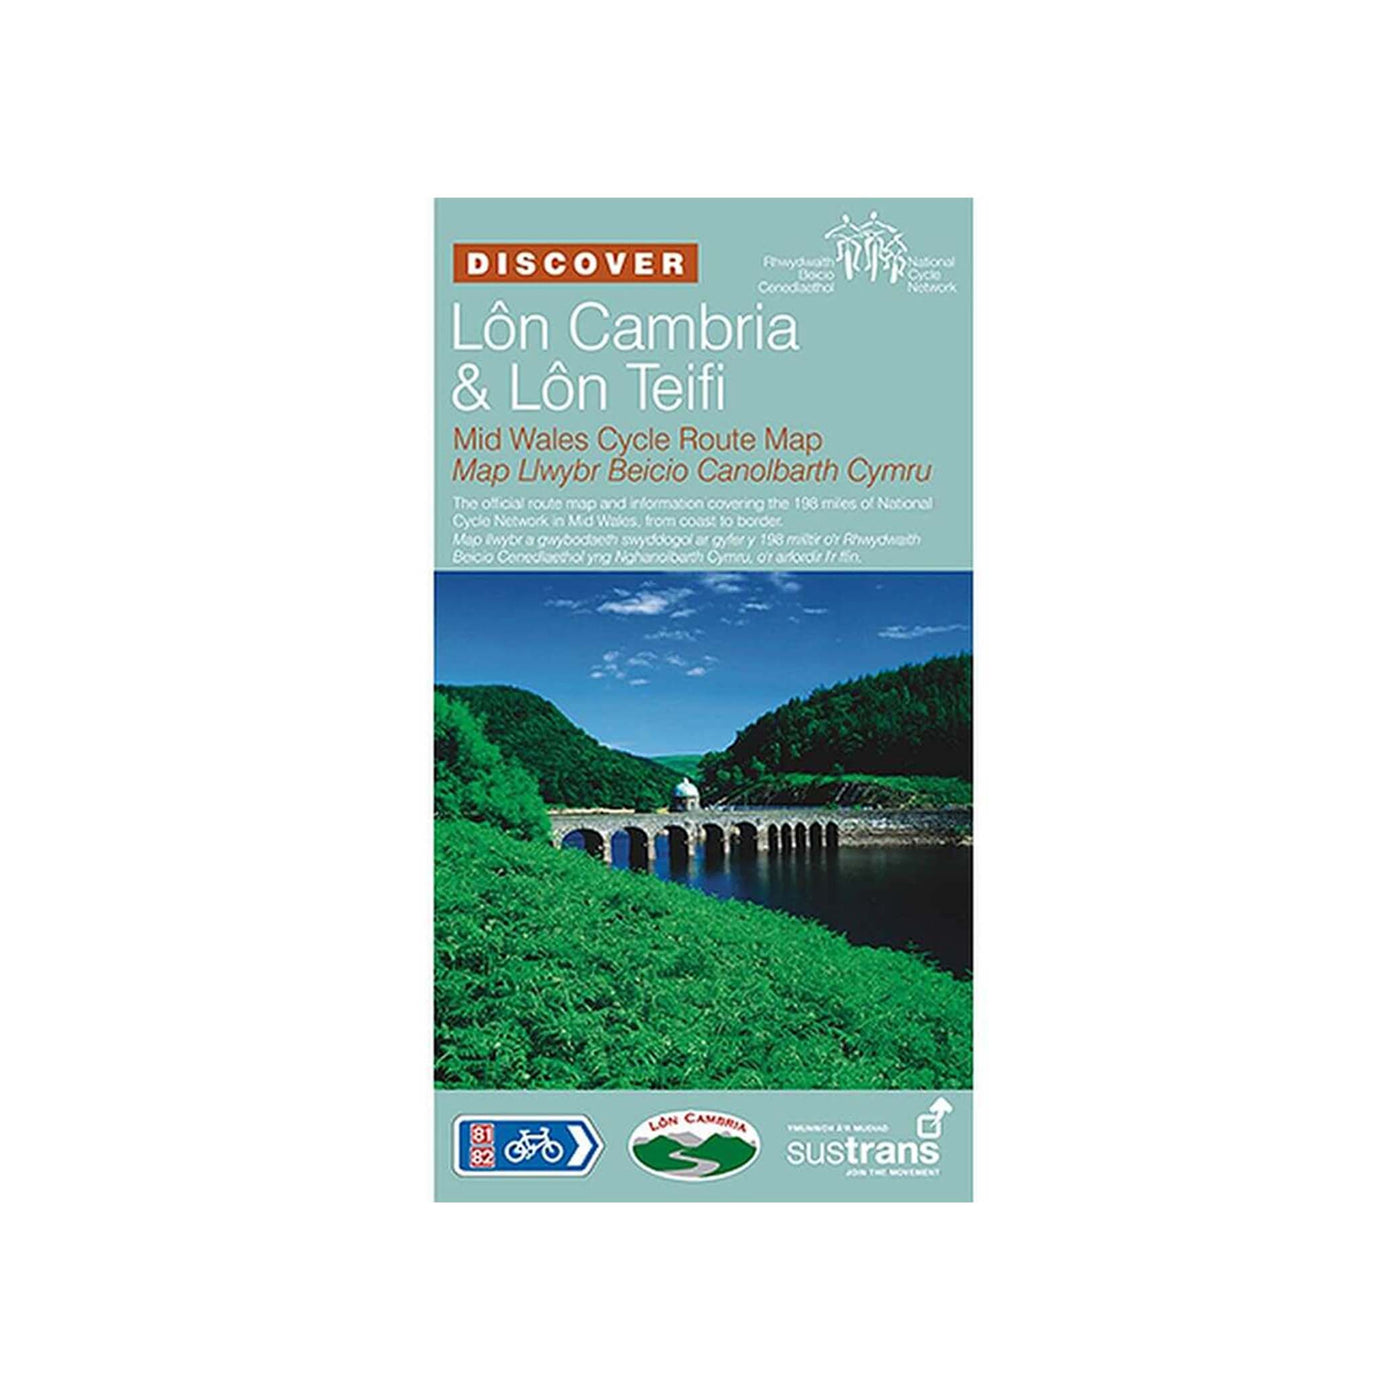 Mid Wales cycle route map. Cycle route 81 and 82, 